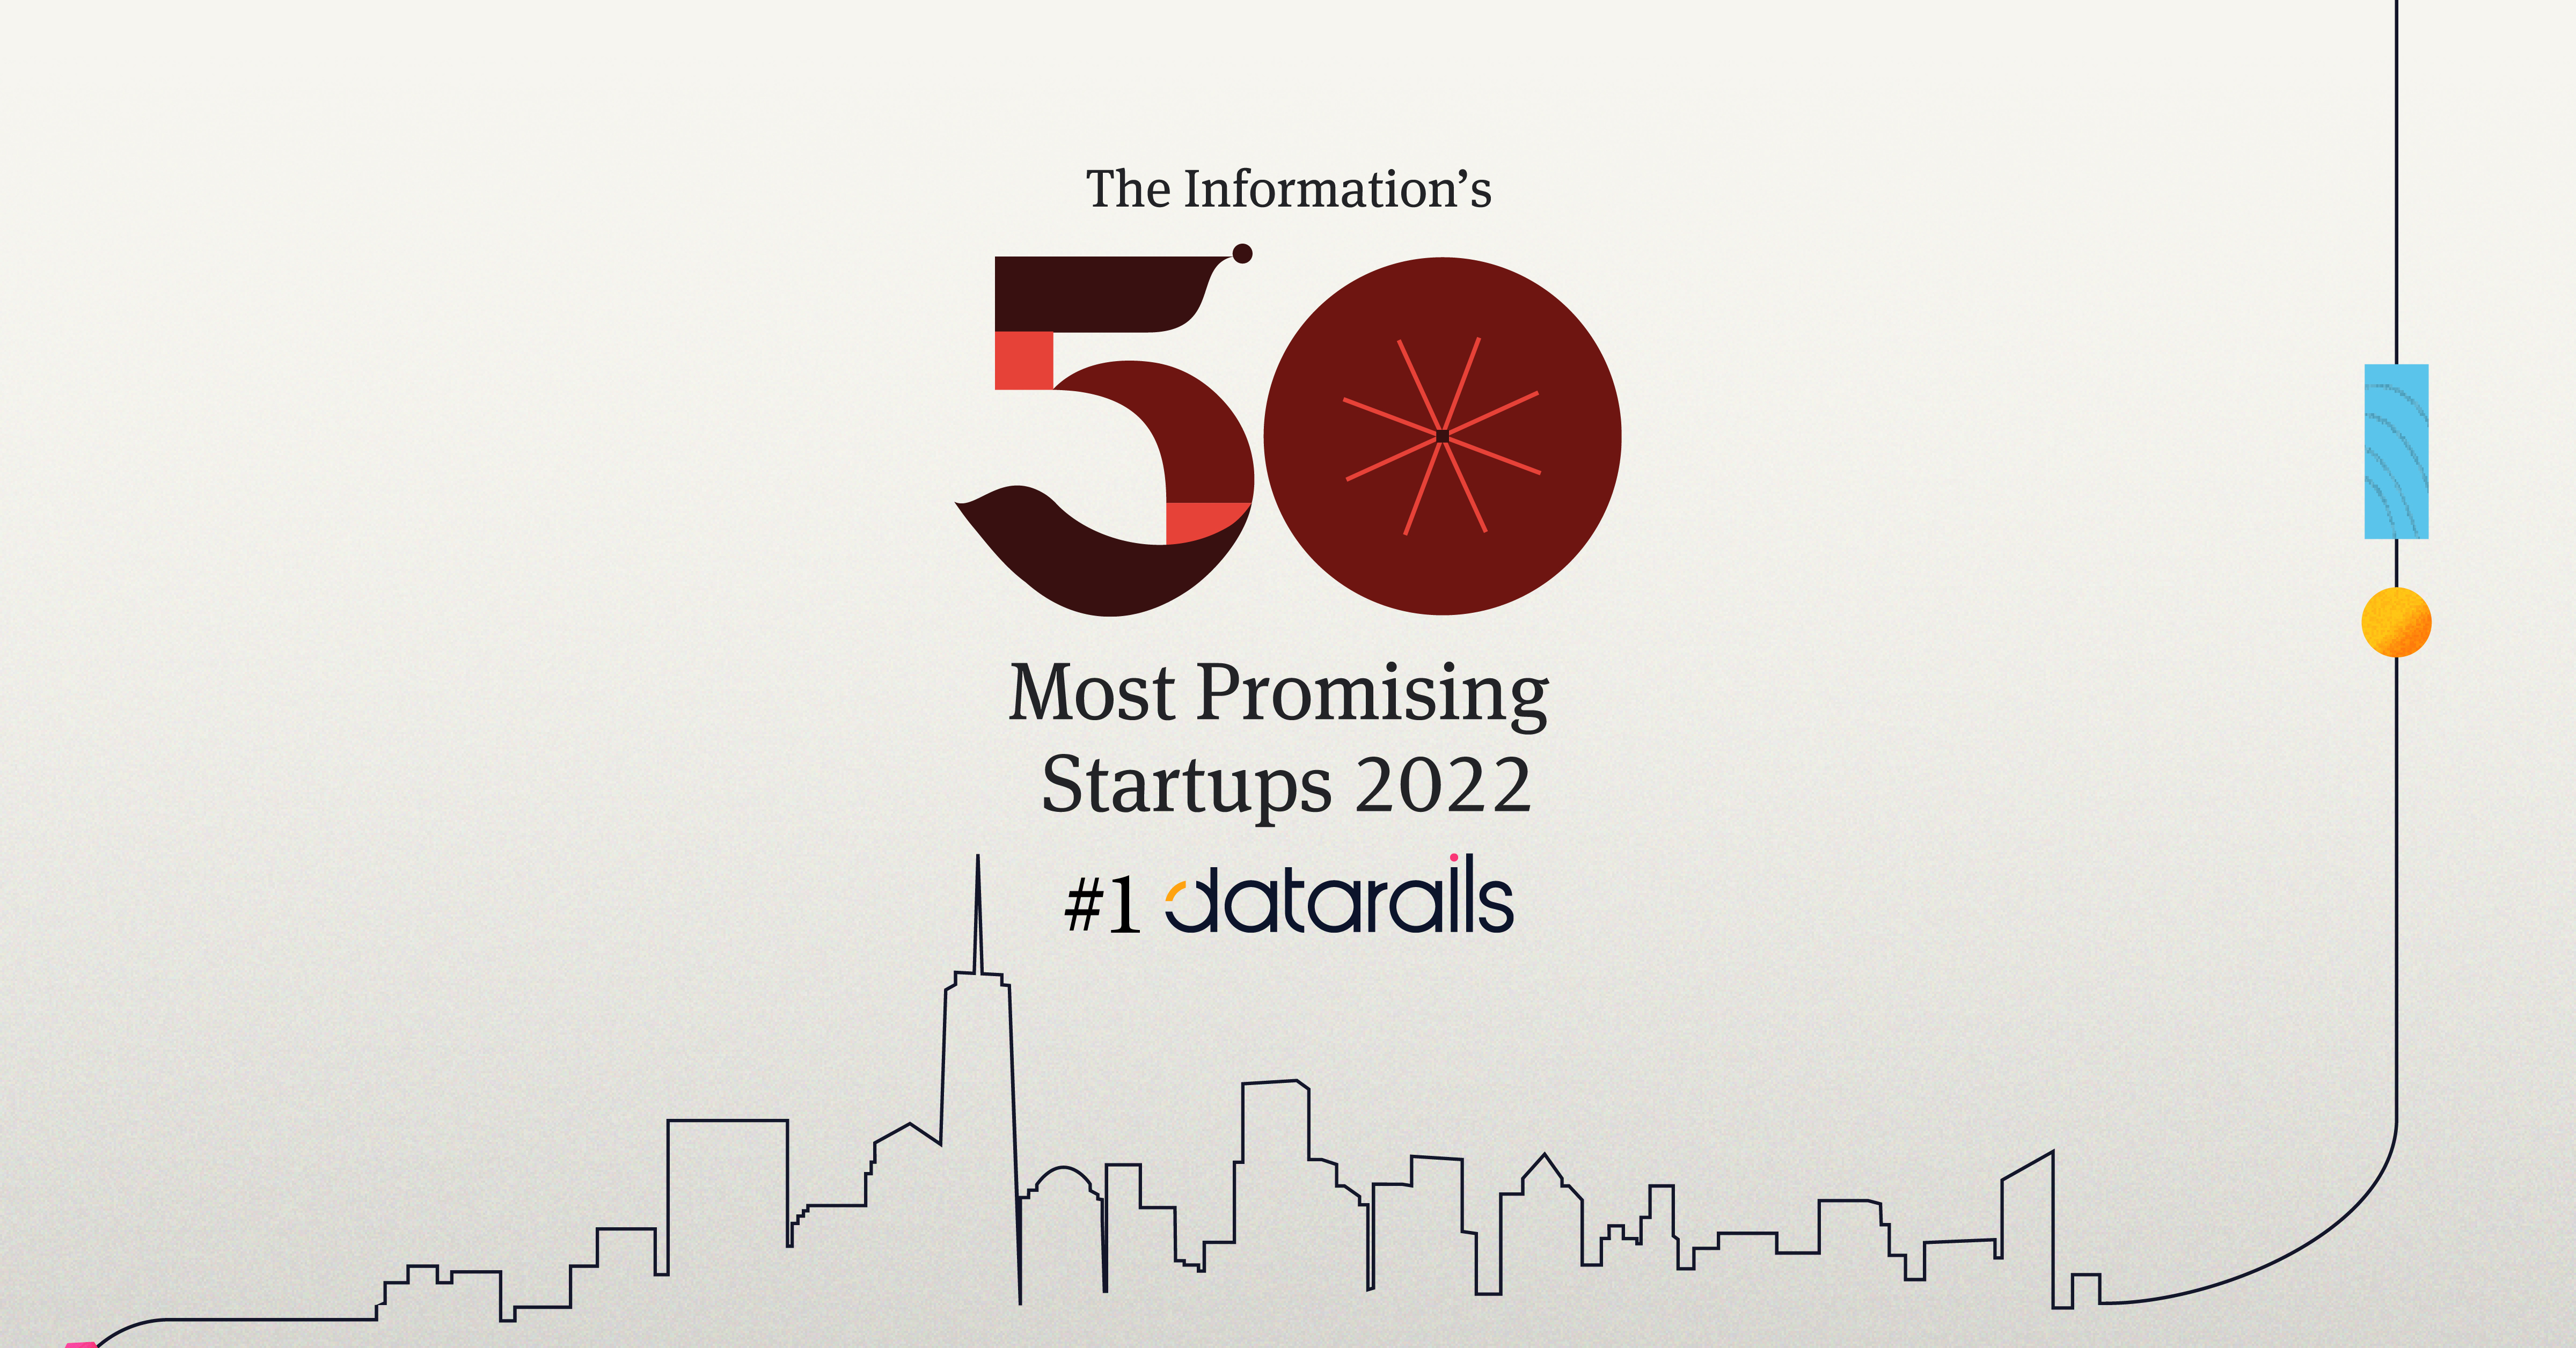 Datarails Wins The Most Promising B2B Startup Award for 2022